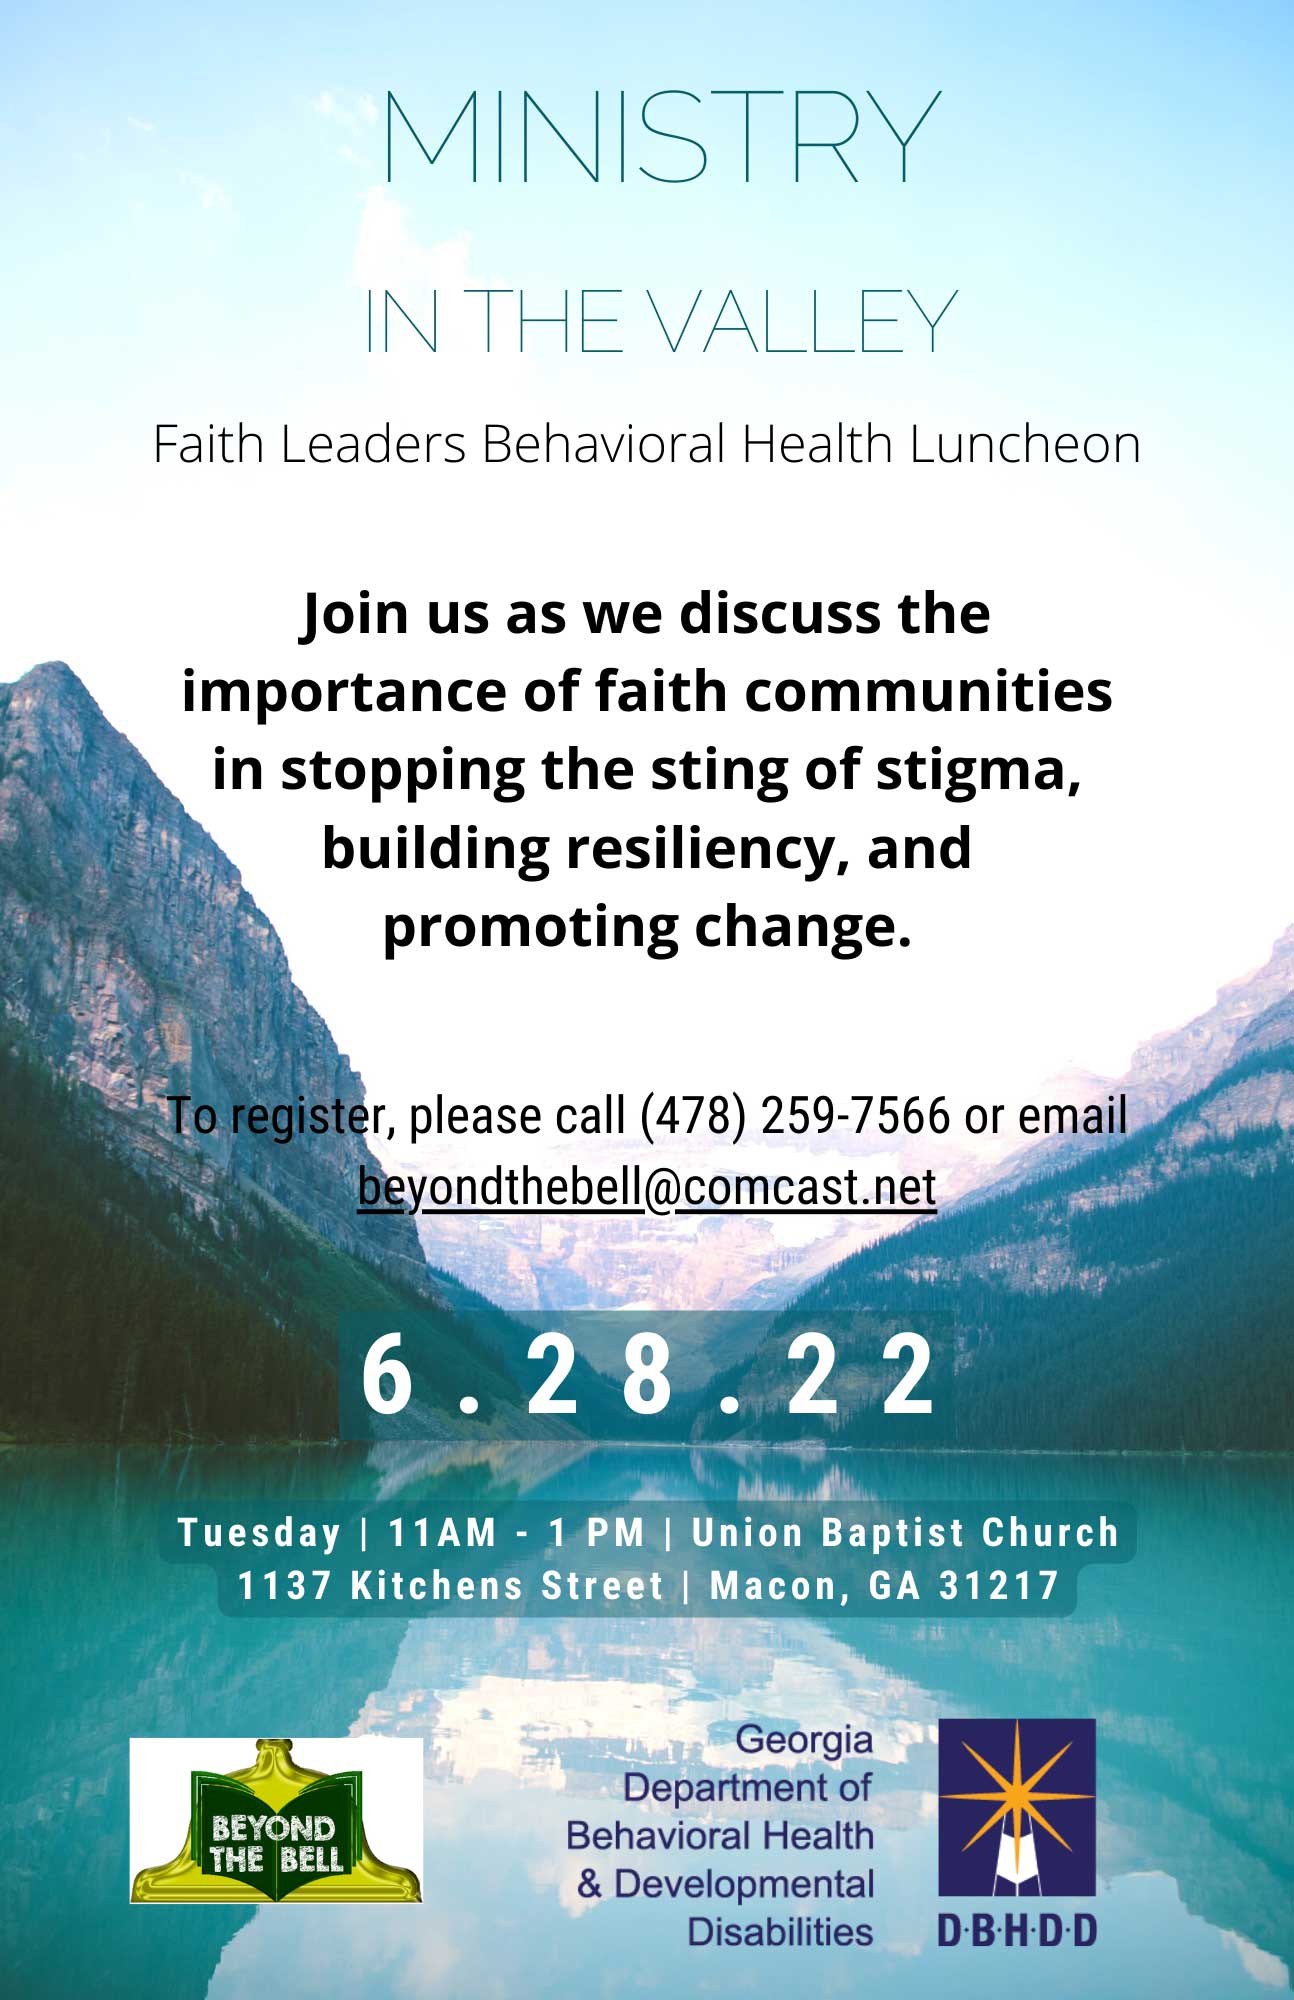 Poster for Ministry in the Valley - Faith Leaders Behavioral Luncheon. June 28, 2022 from 11-1 at Union Baptist Church